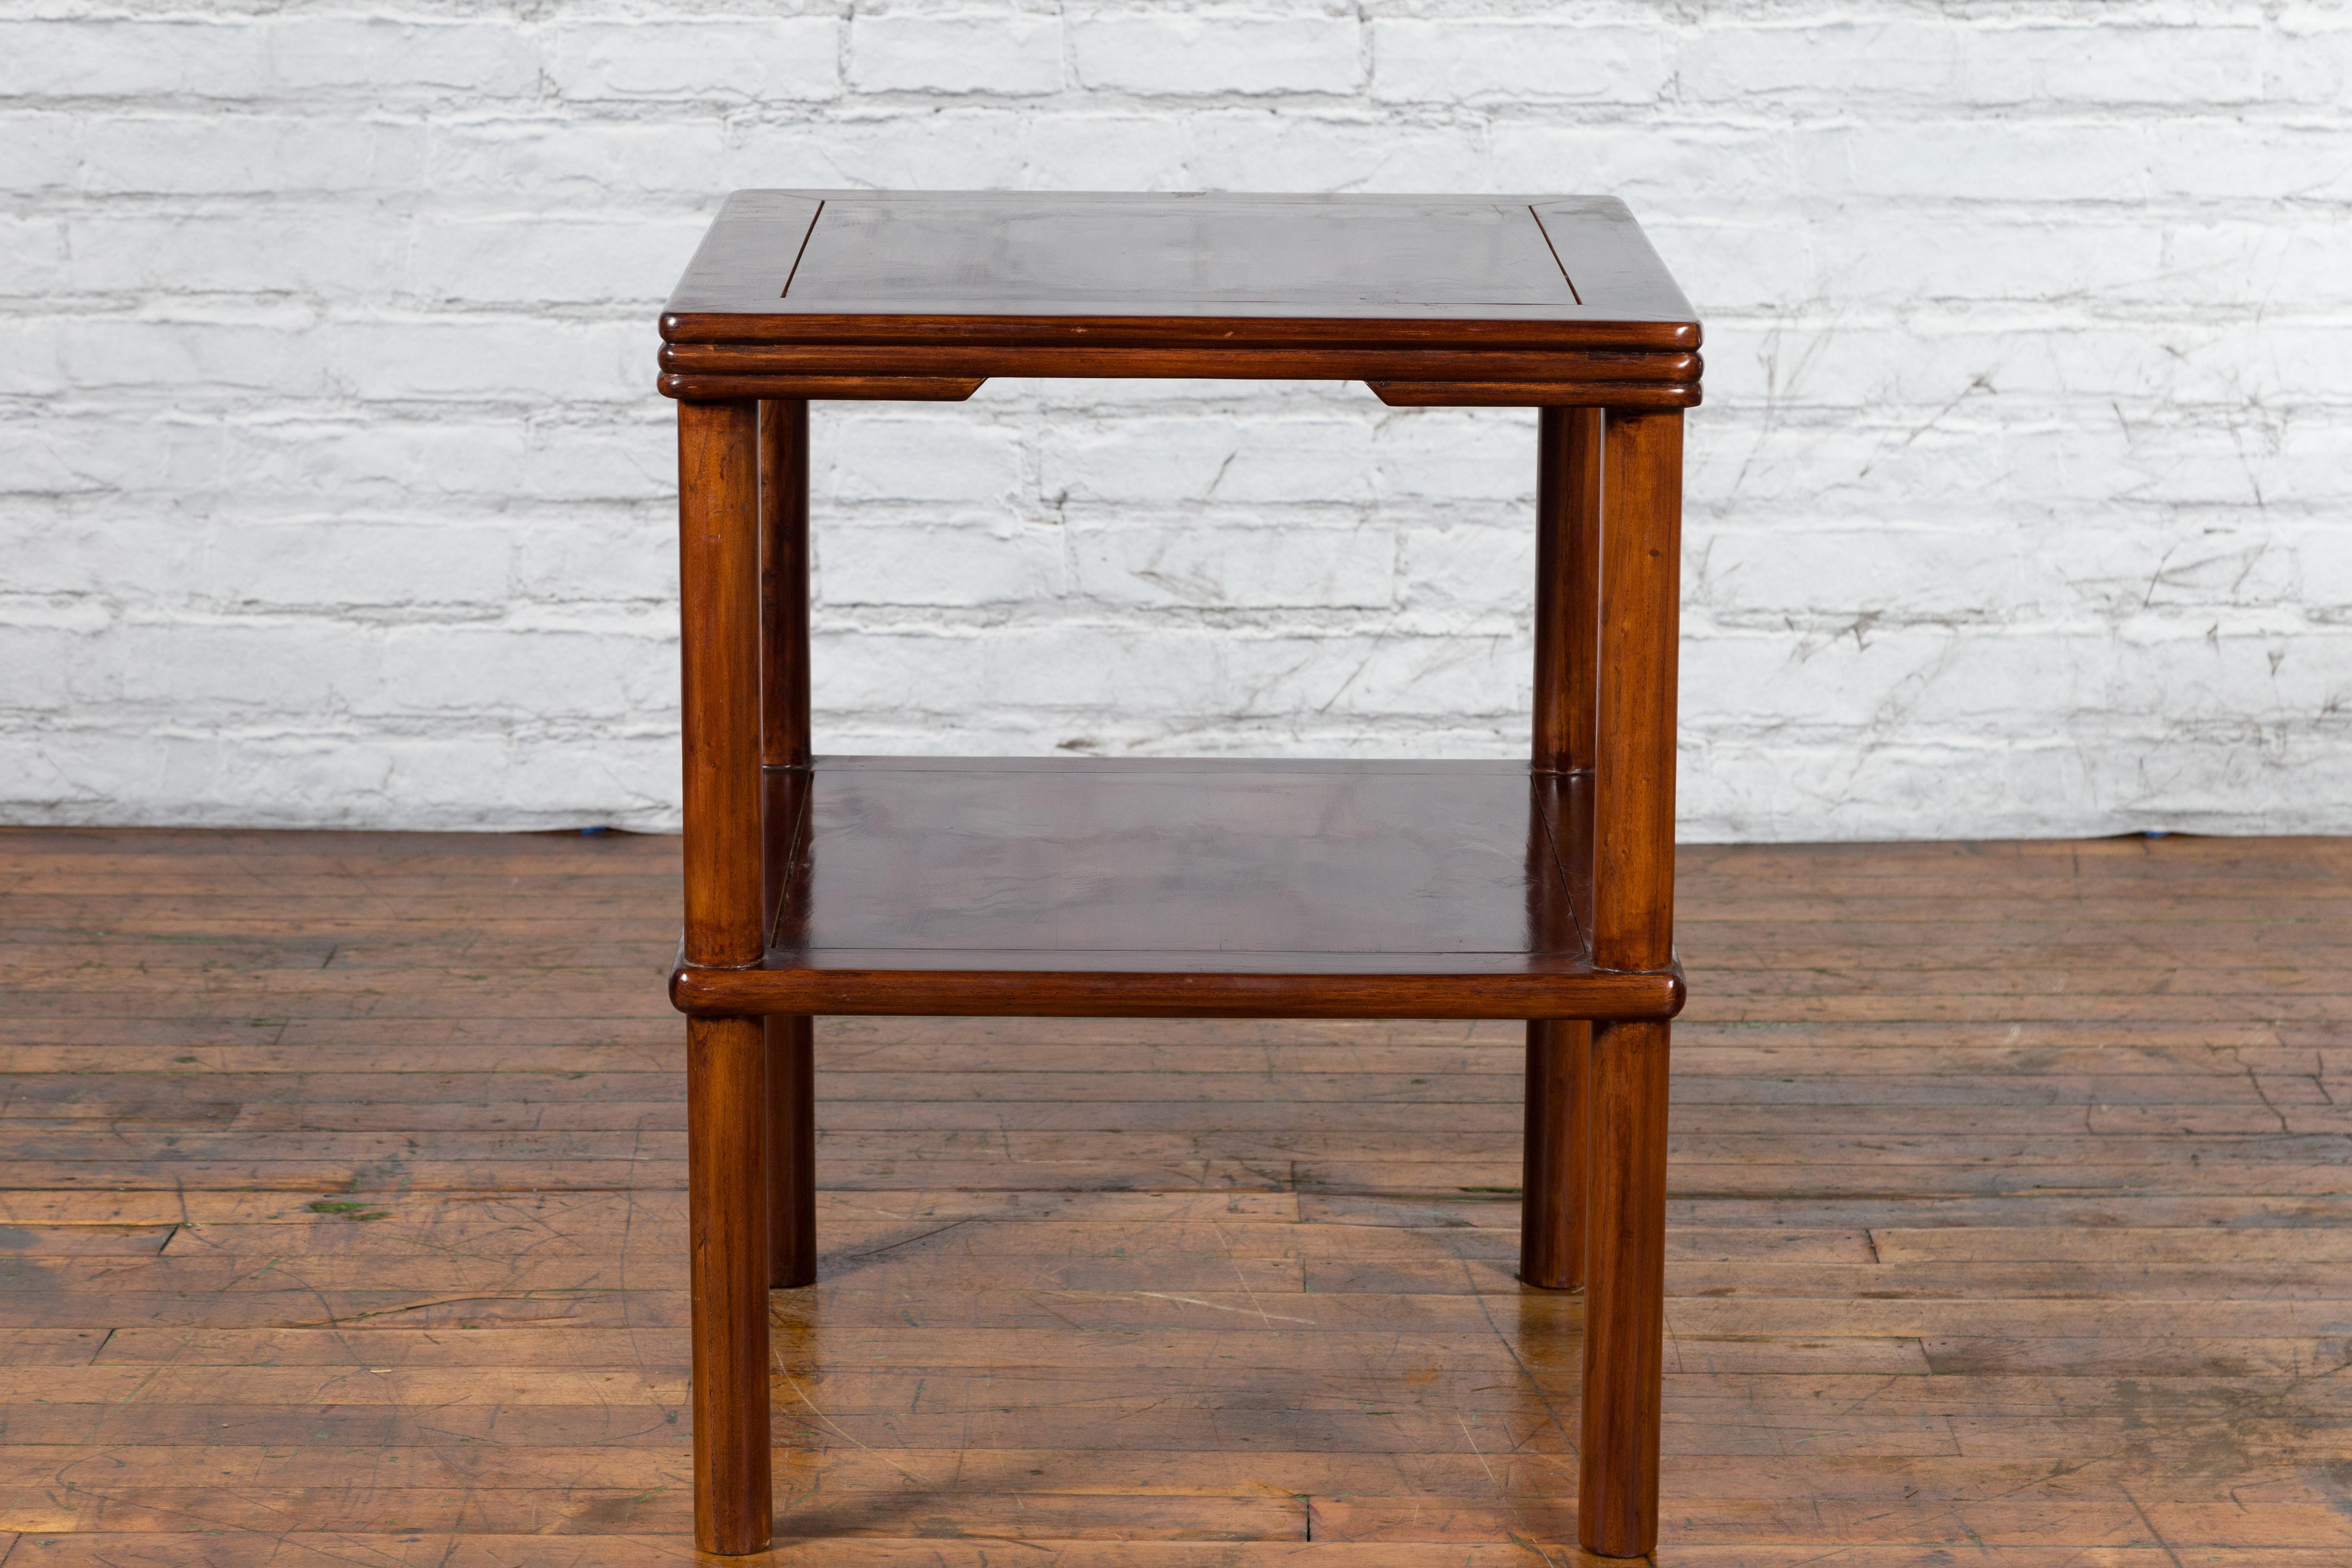 A Chinese Qing Dynasty period brown lacquered side table from the 19th century, with reeded apron. Created in China during the Qing Dynasty period, this side table features a square top with central board, sitting above a reeded apron. Raised on